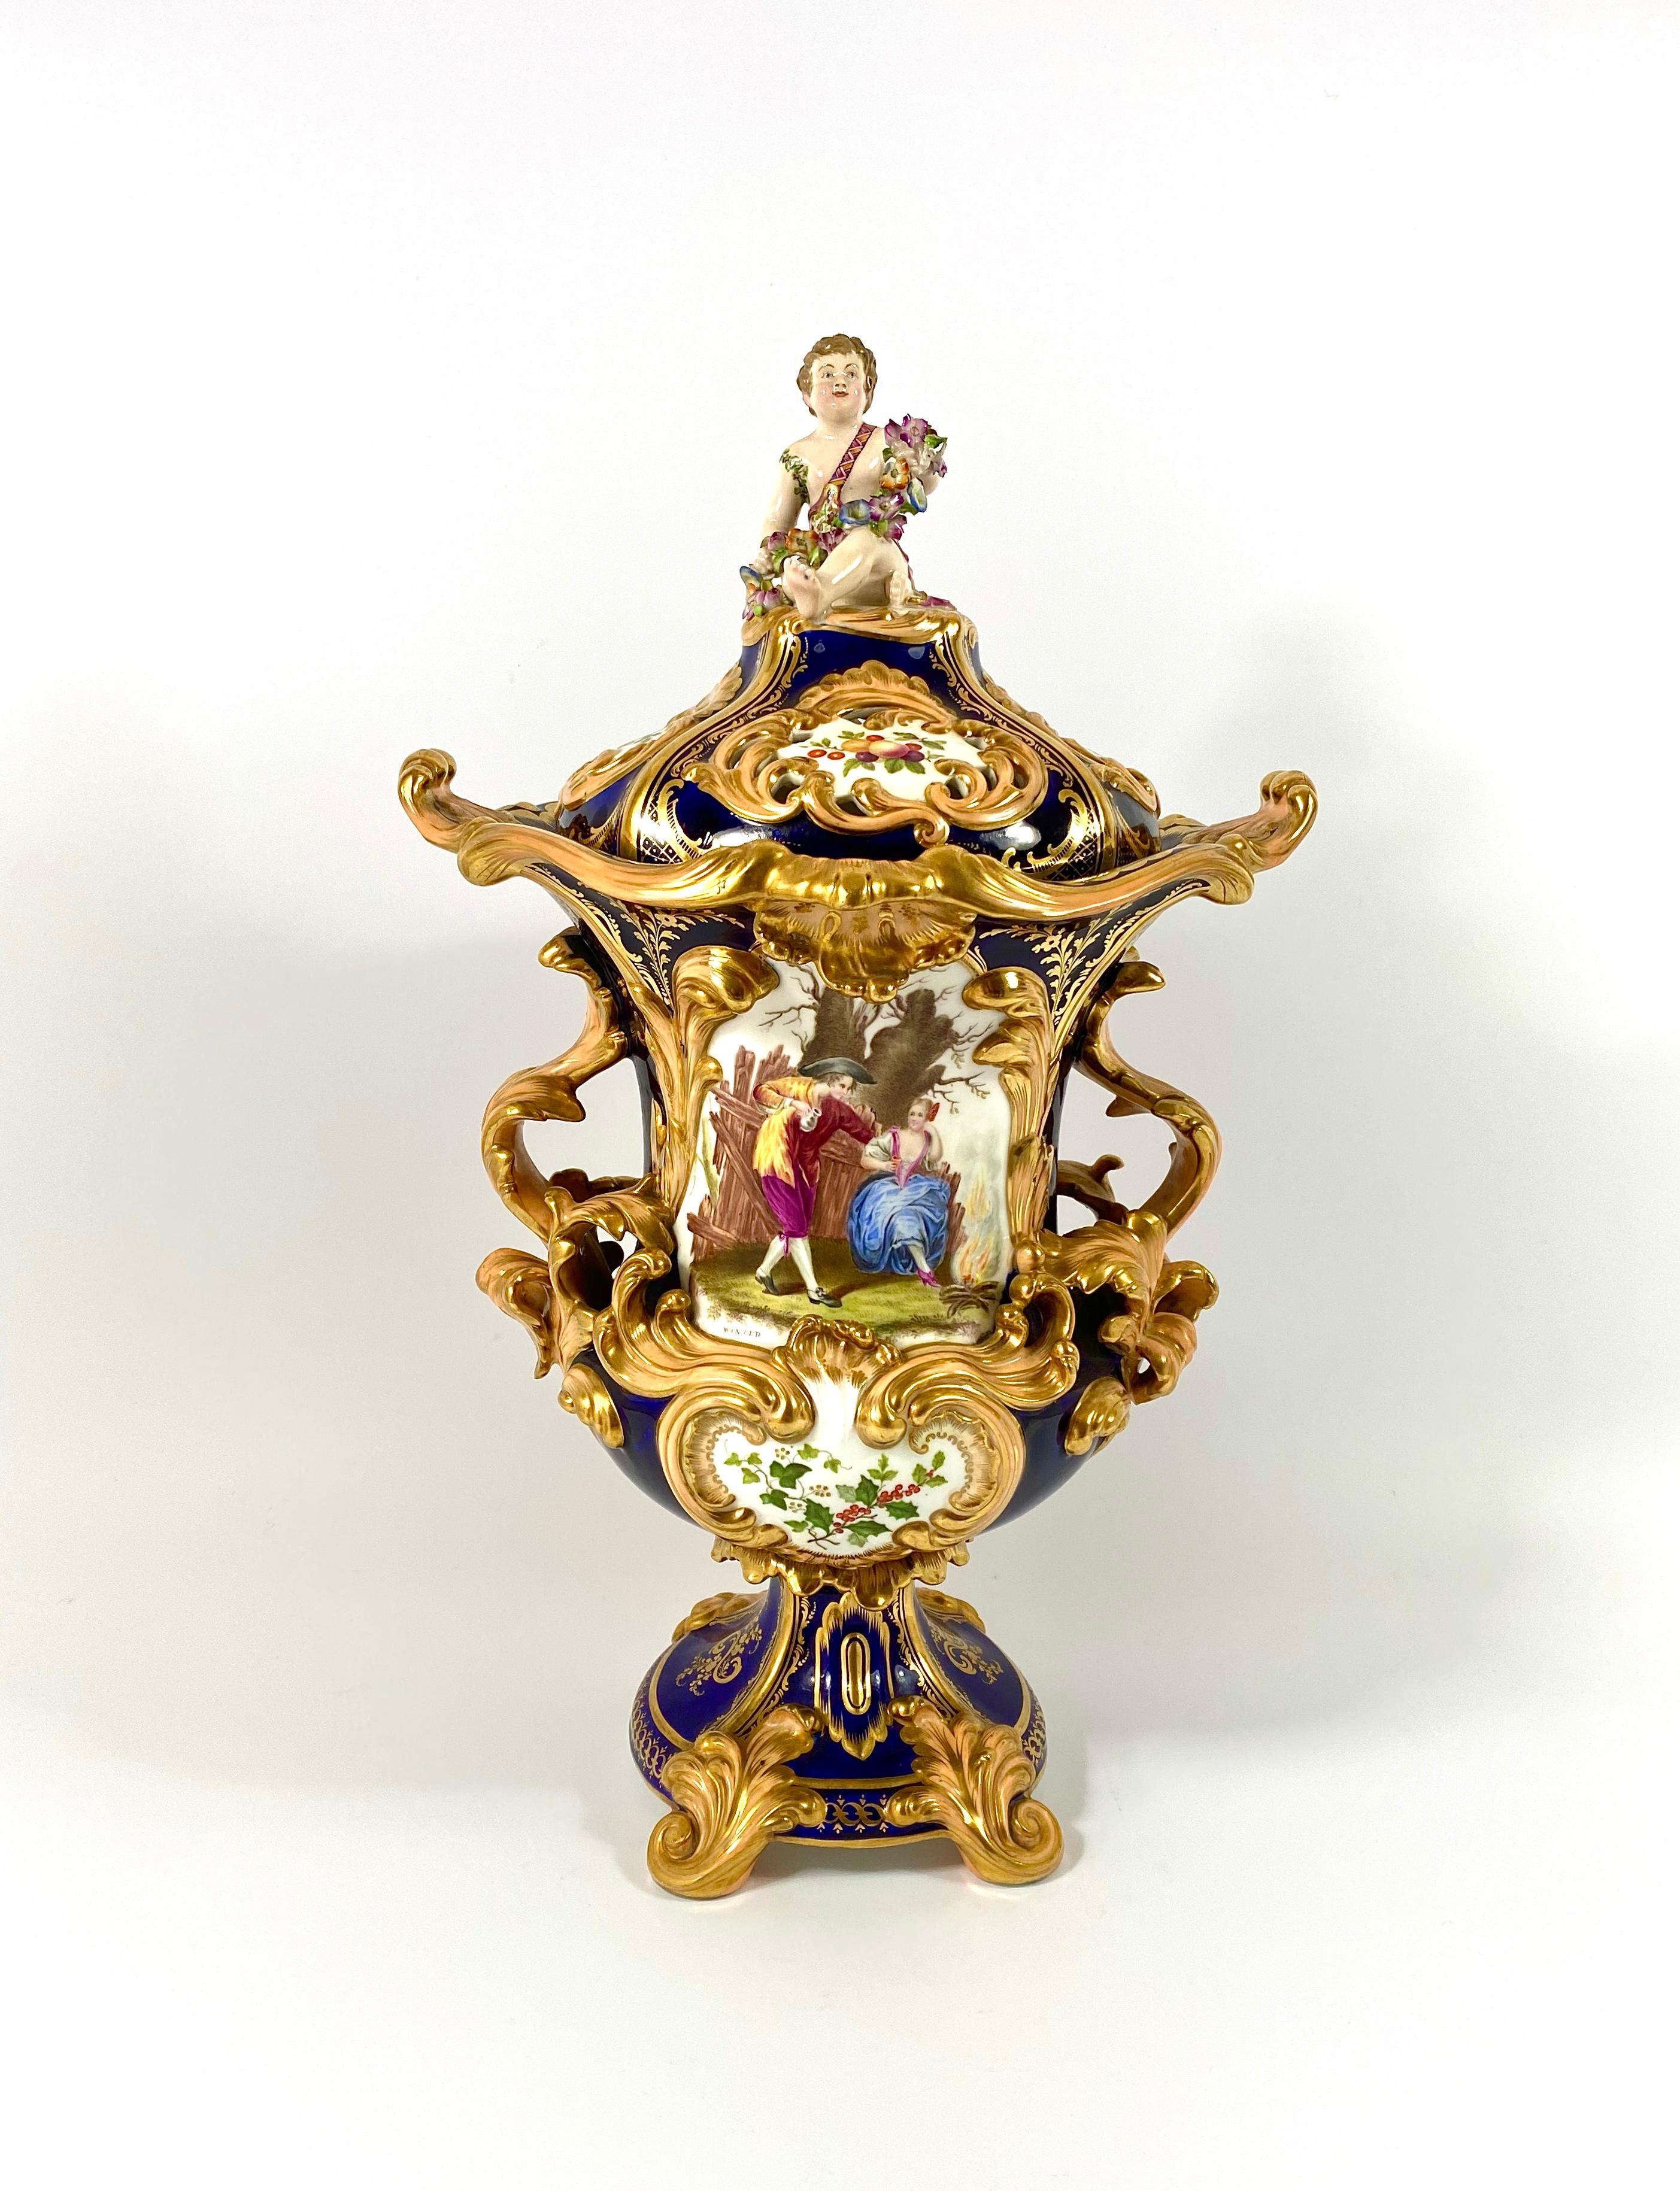 An exceptionally fine and sumptuous pair of Minton porcelain ‘New Vases’, c. 1830. The Campana shaped pedestal vases, beautifully hand painted with titled scenes of revelling couples, wearing 18th Century costume, and representing The Four Seasons,